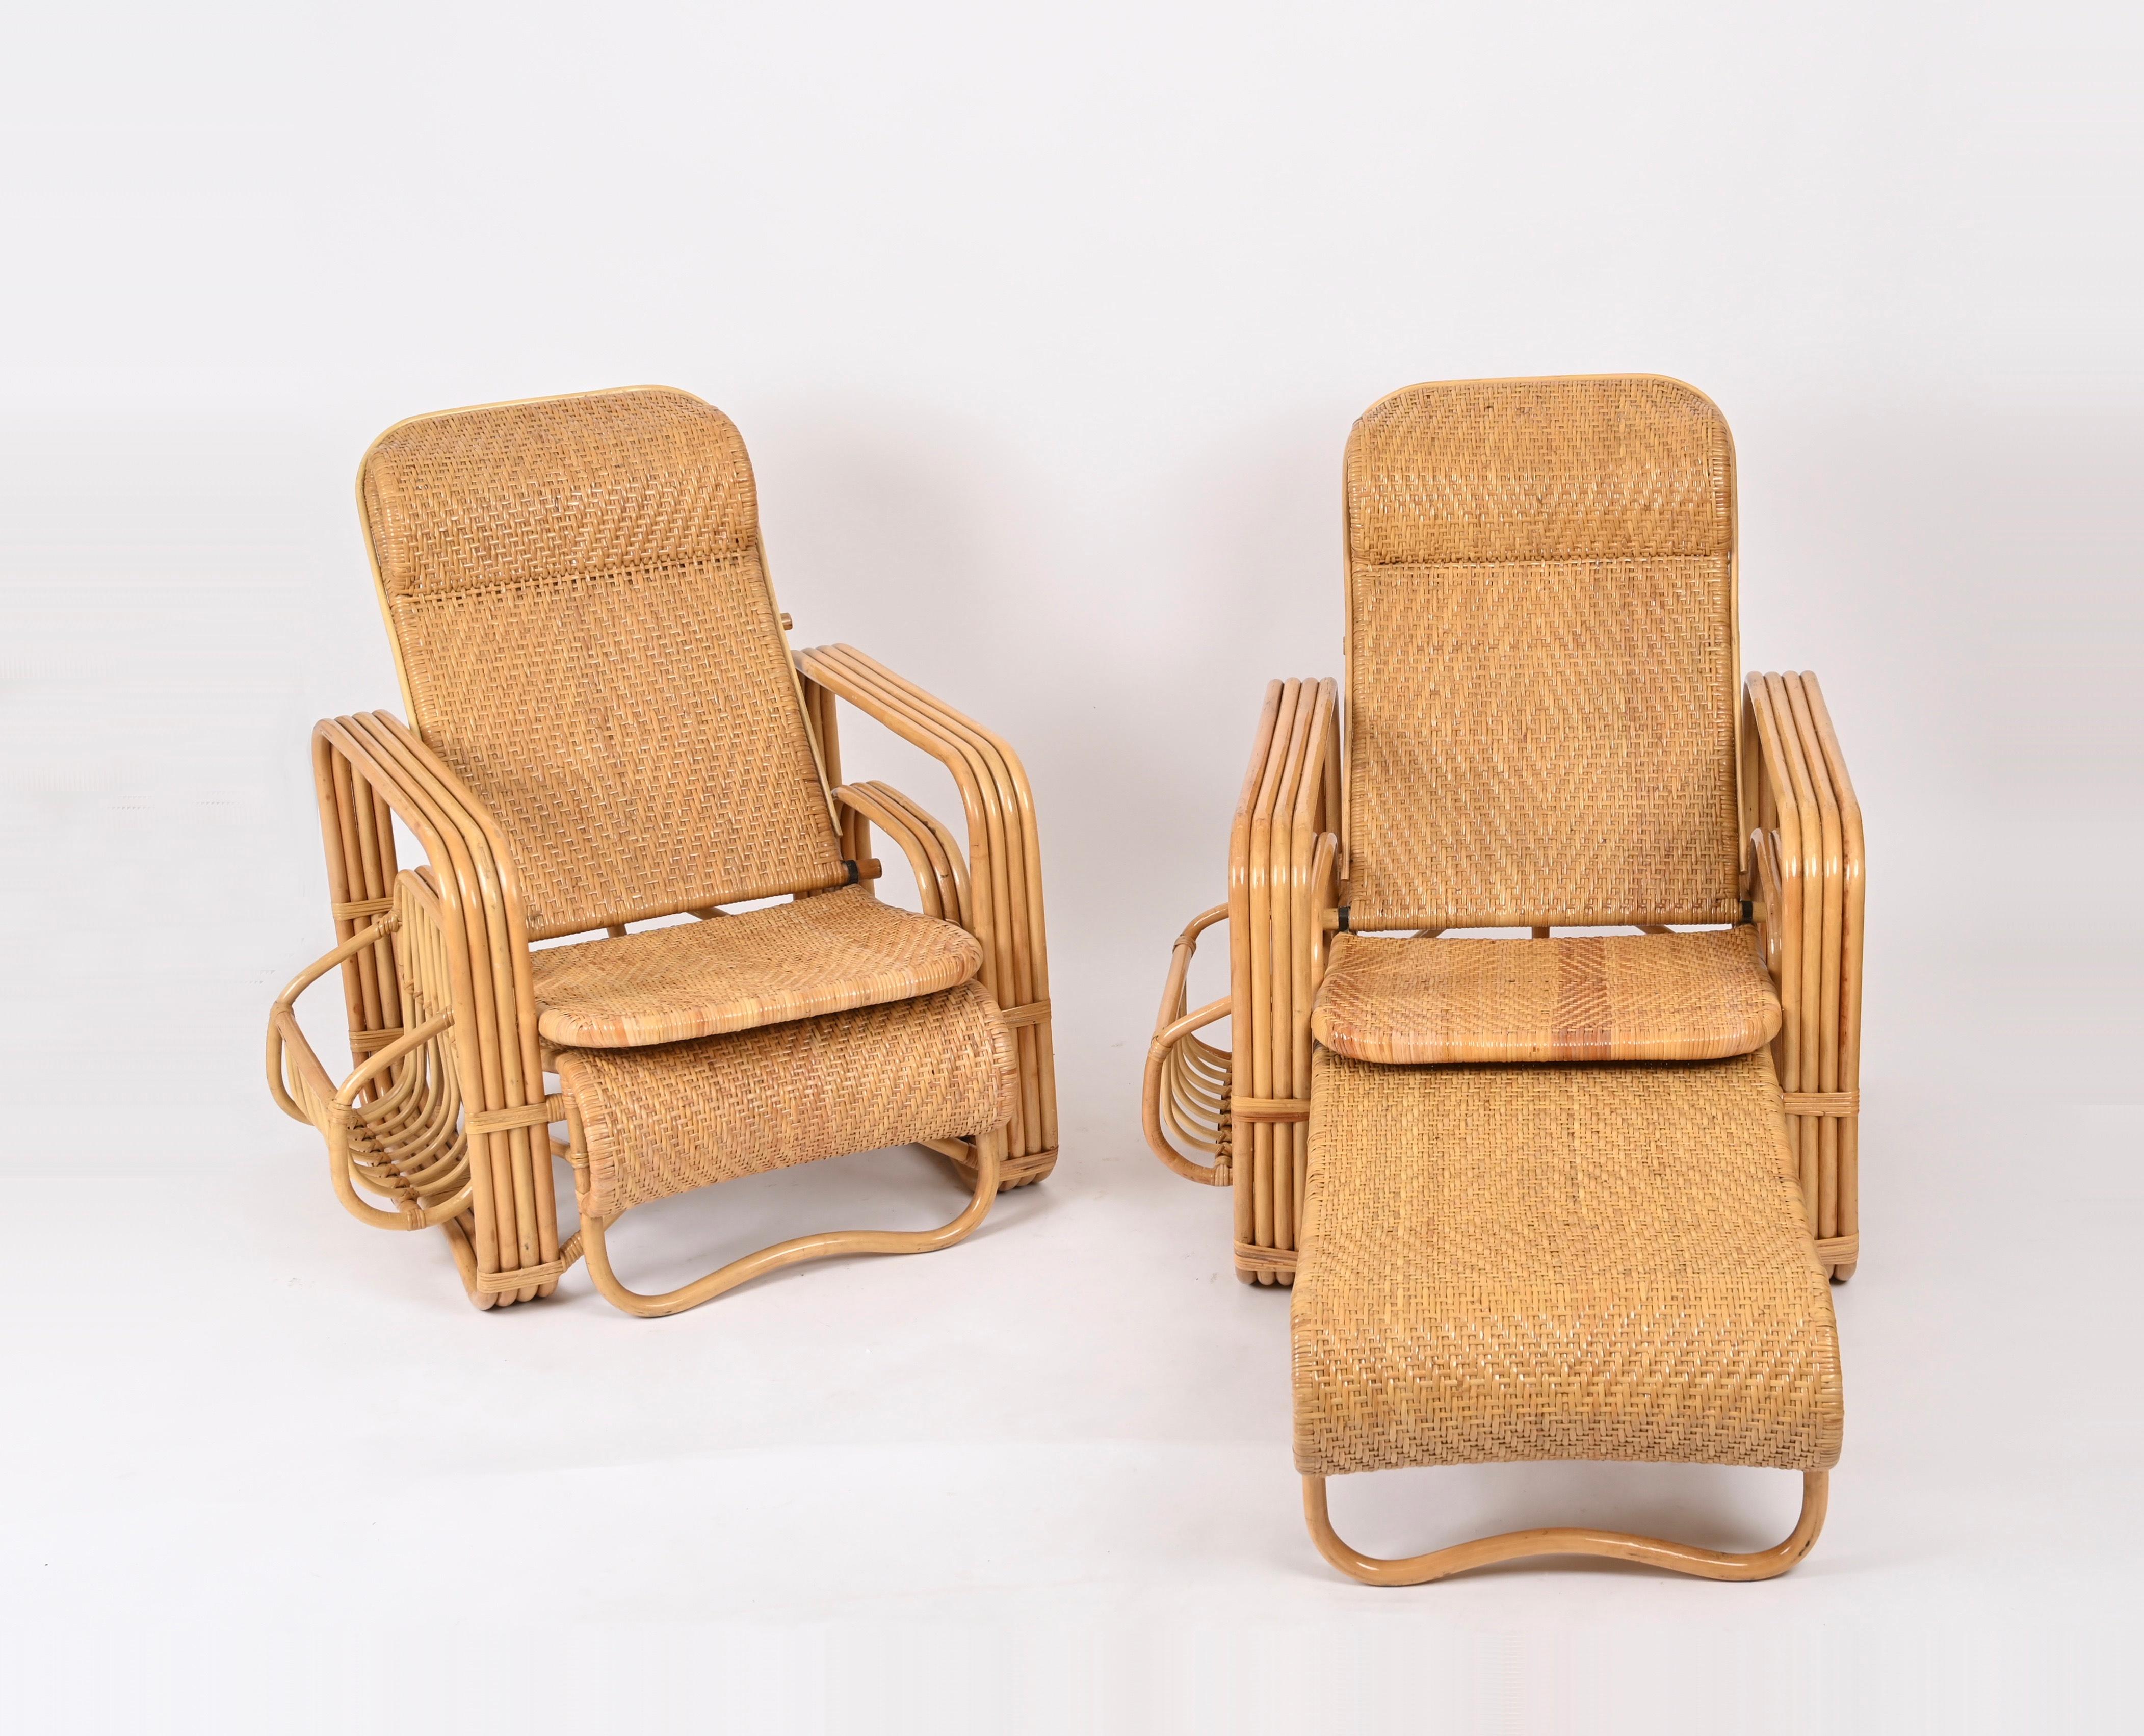 Pair of Adjustable Chaise Longue / Lounge Chairs, Wicker and Rattan, Italy '70s  For Sale 8